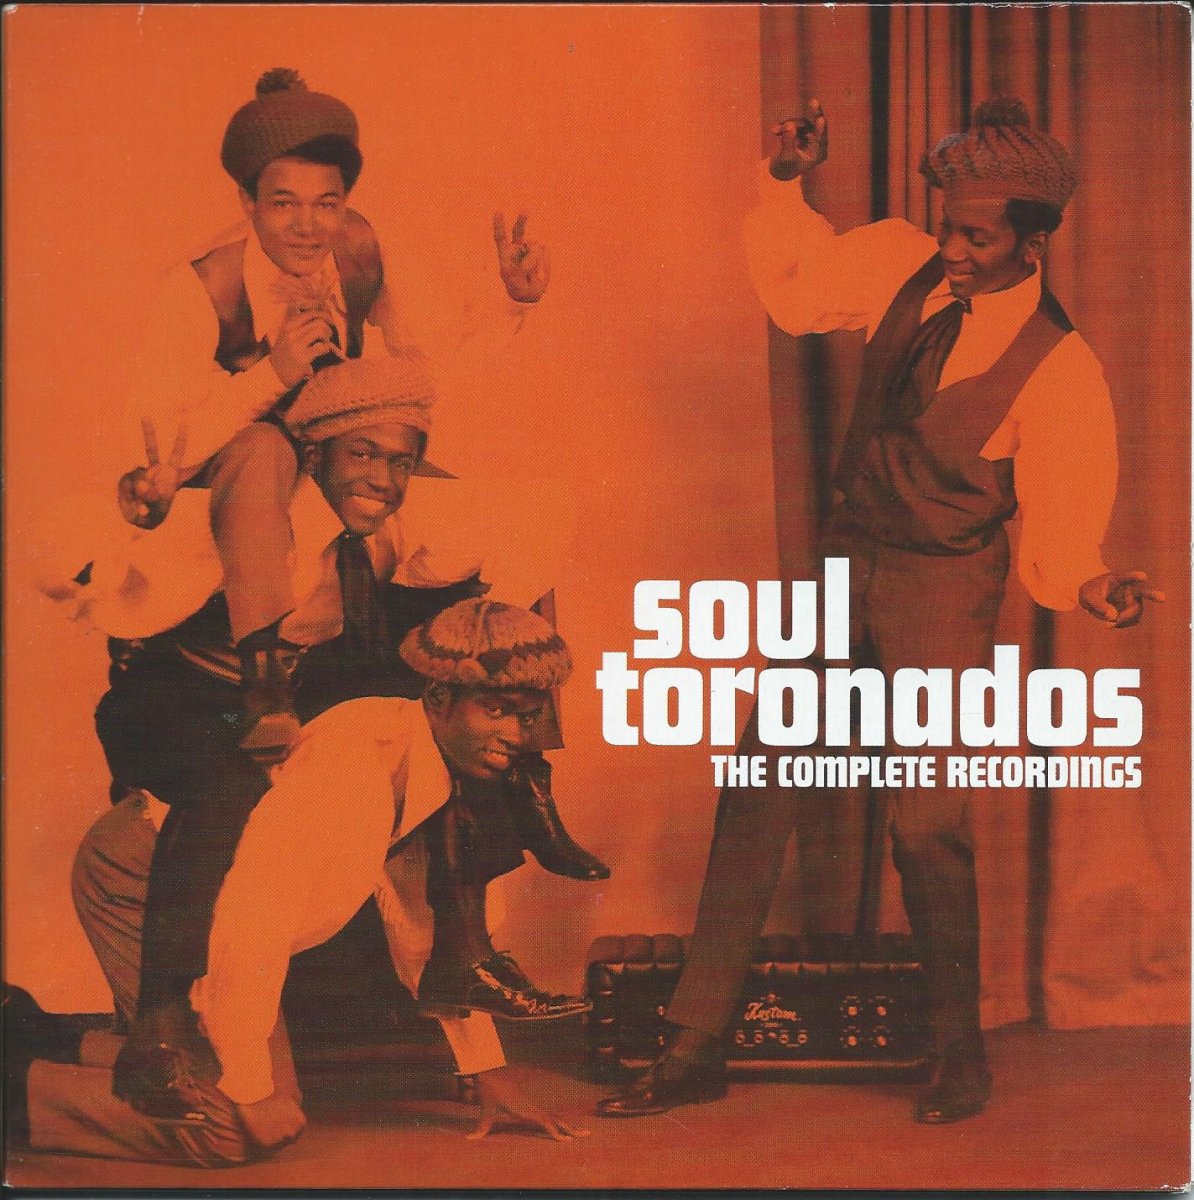 SOUL TORONADOS / HOT PANTS BREAK DOWN / GO FOR YOURSELF (THE COMPLETE RECORDINGS) (37